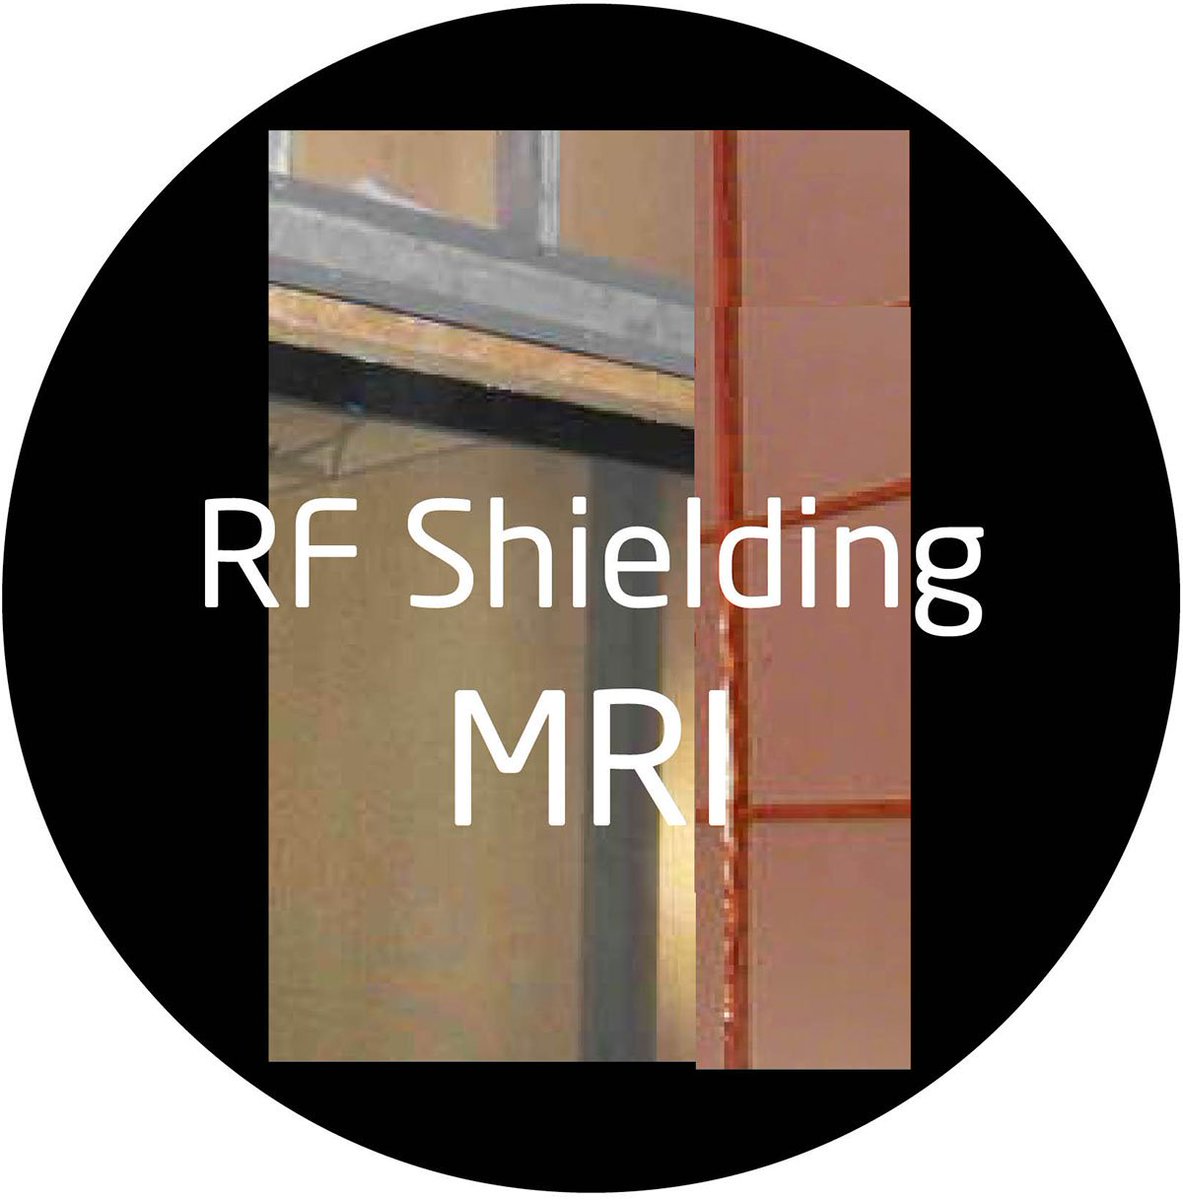 Preparing Your MRI Room For RF Shielding
Are you getting ready to set up an MRI room at your medical facility? If so, there are a lot of decisions to make, from choosing the right MRI machine to..
hubs.ly/Q02rKrxS0
#Medicalimaging #hospitals #service #shielding